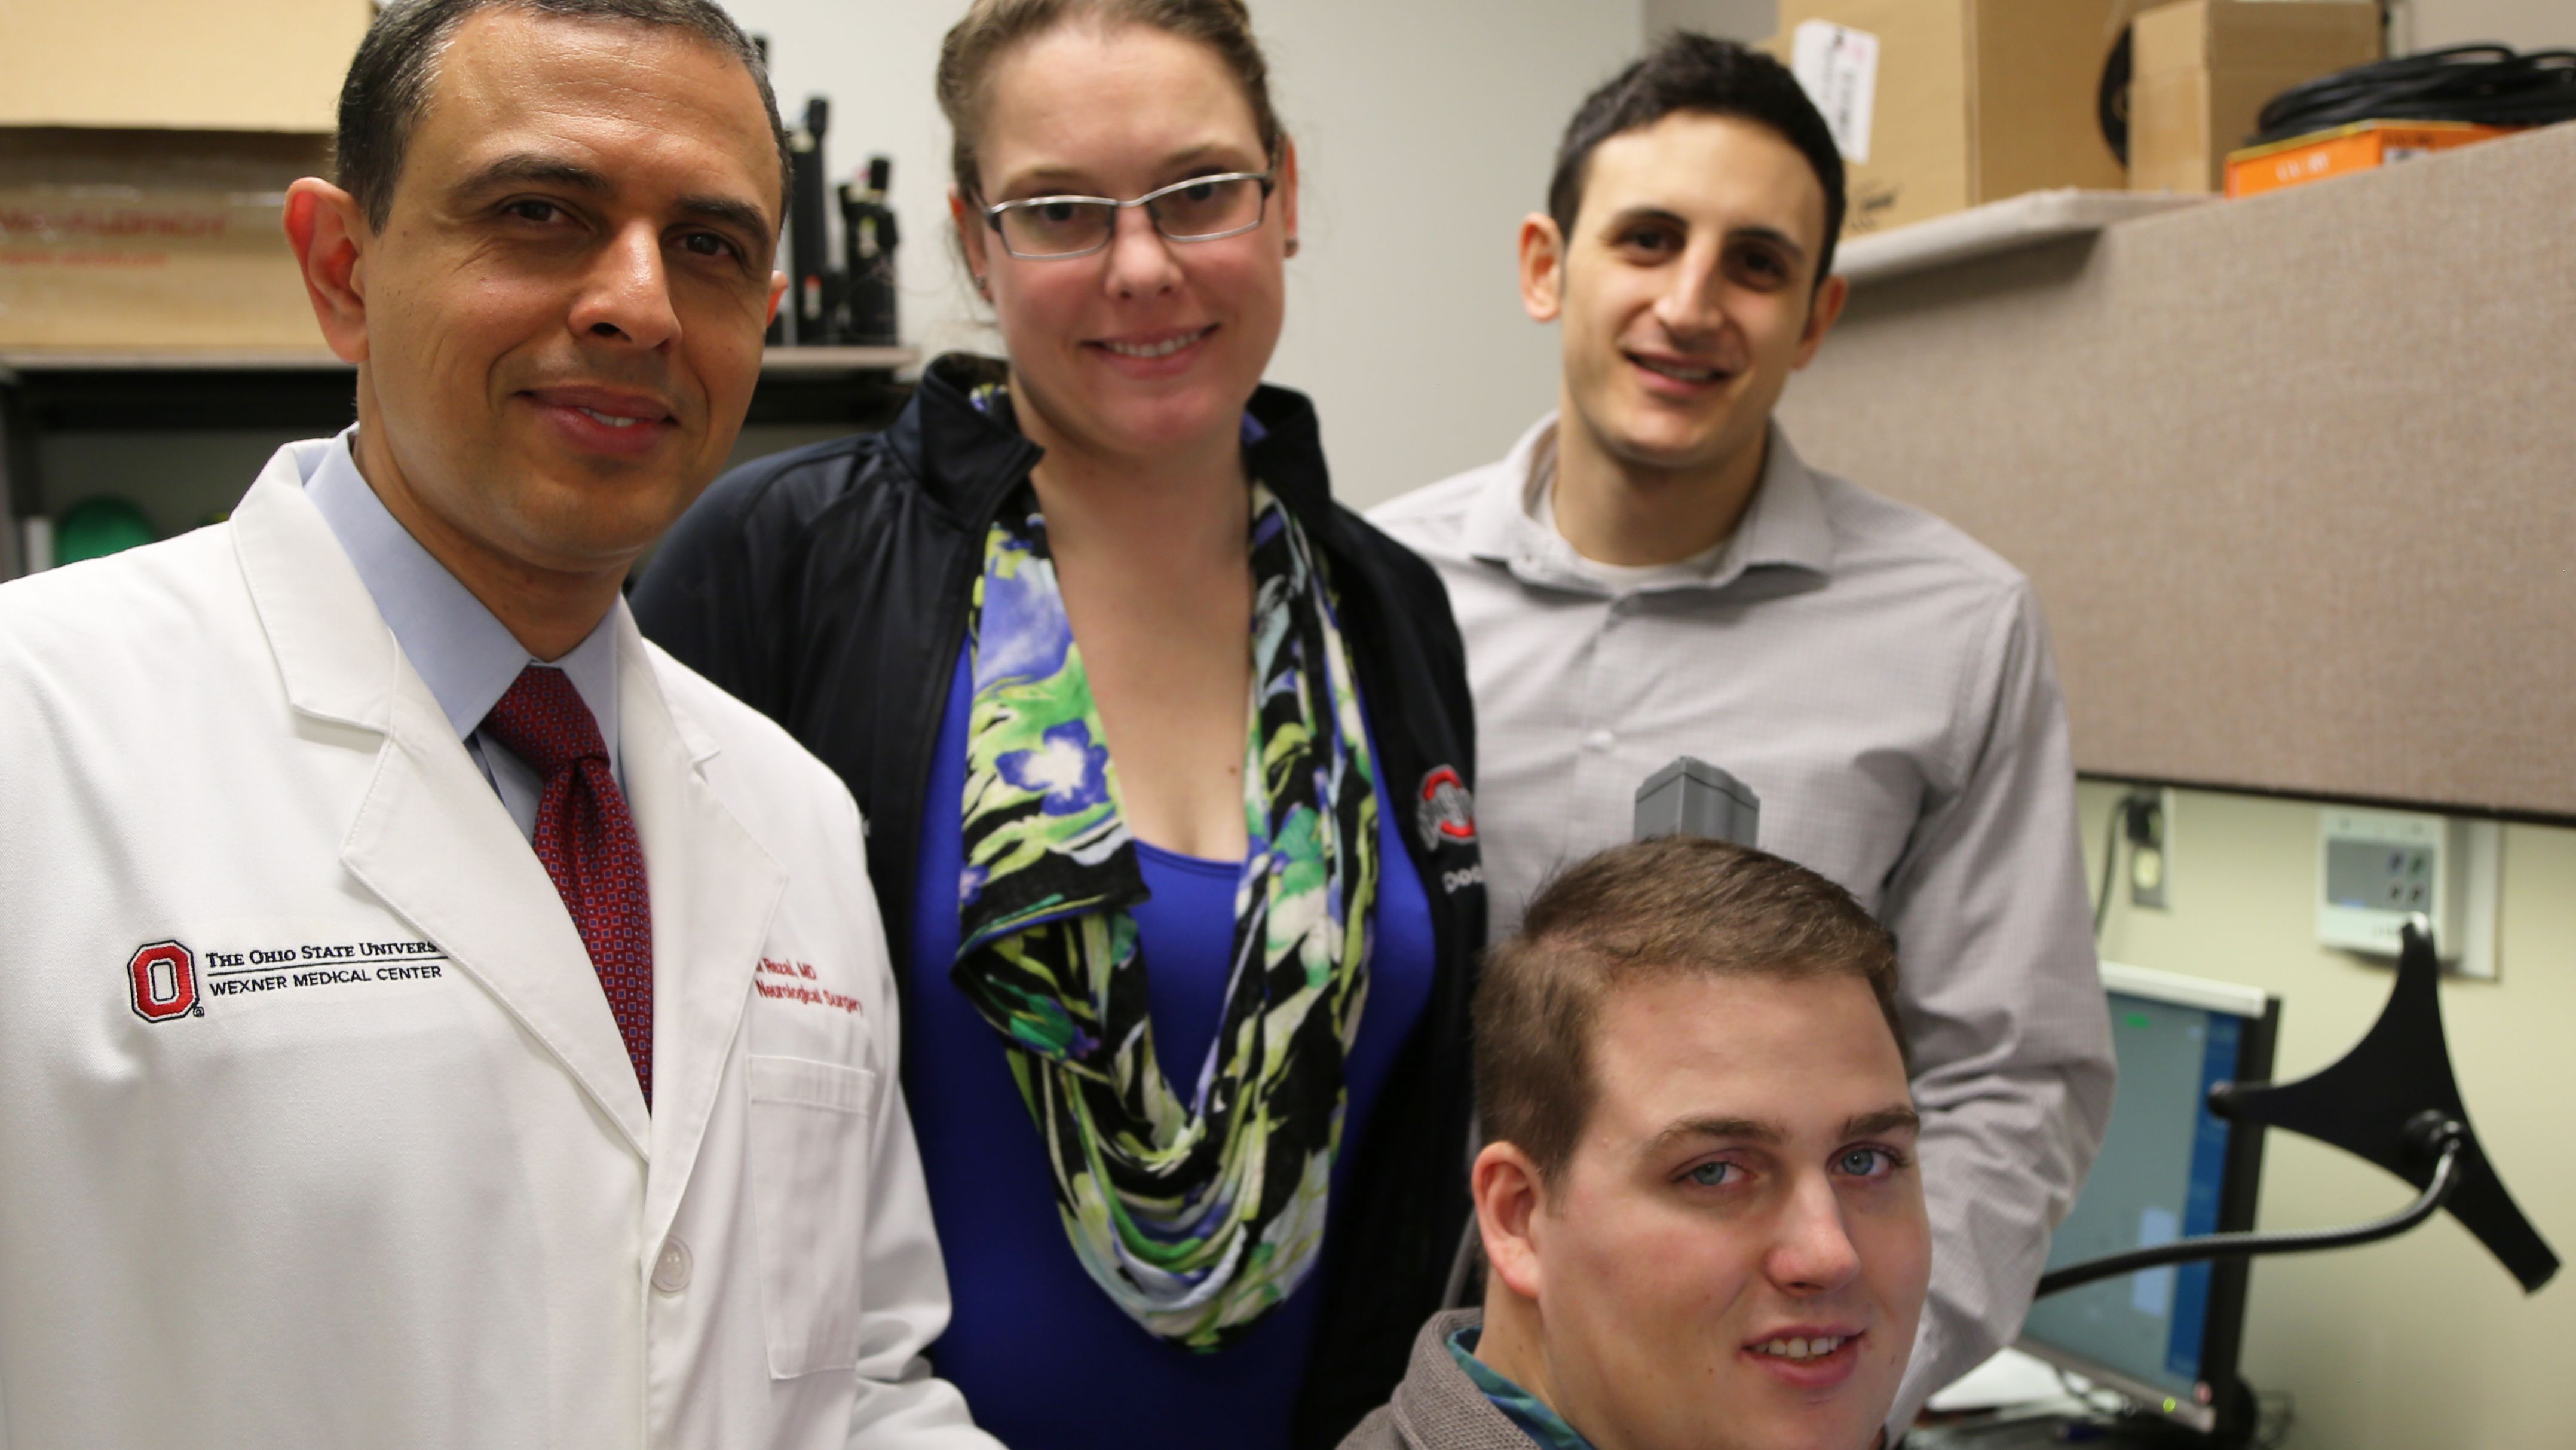 Patient Ian Burkhart, seated, poses with members of his research team during a neural bypass training session.